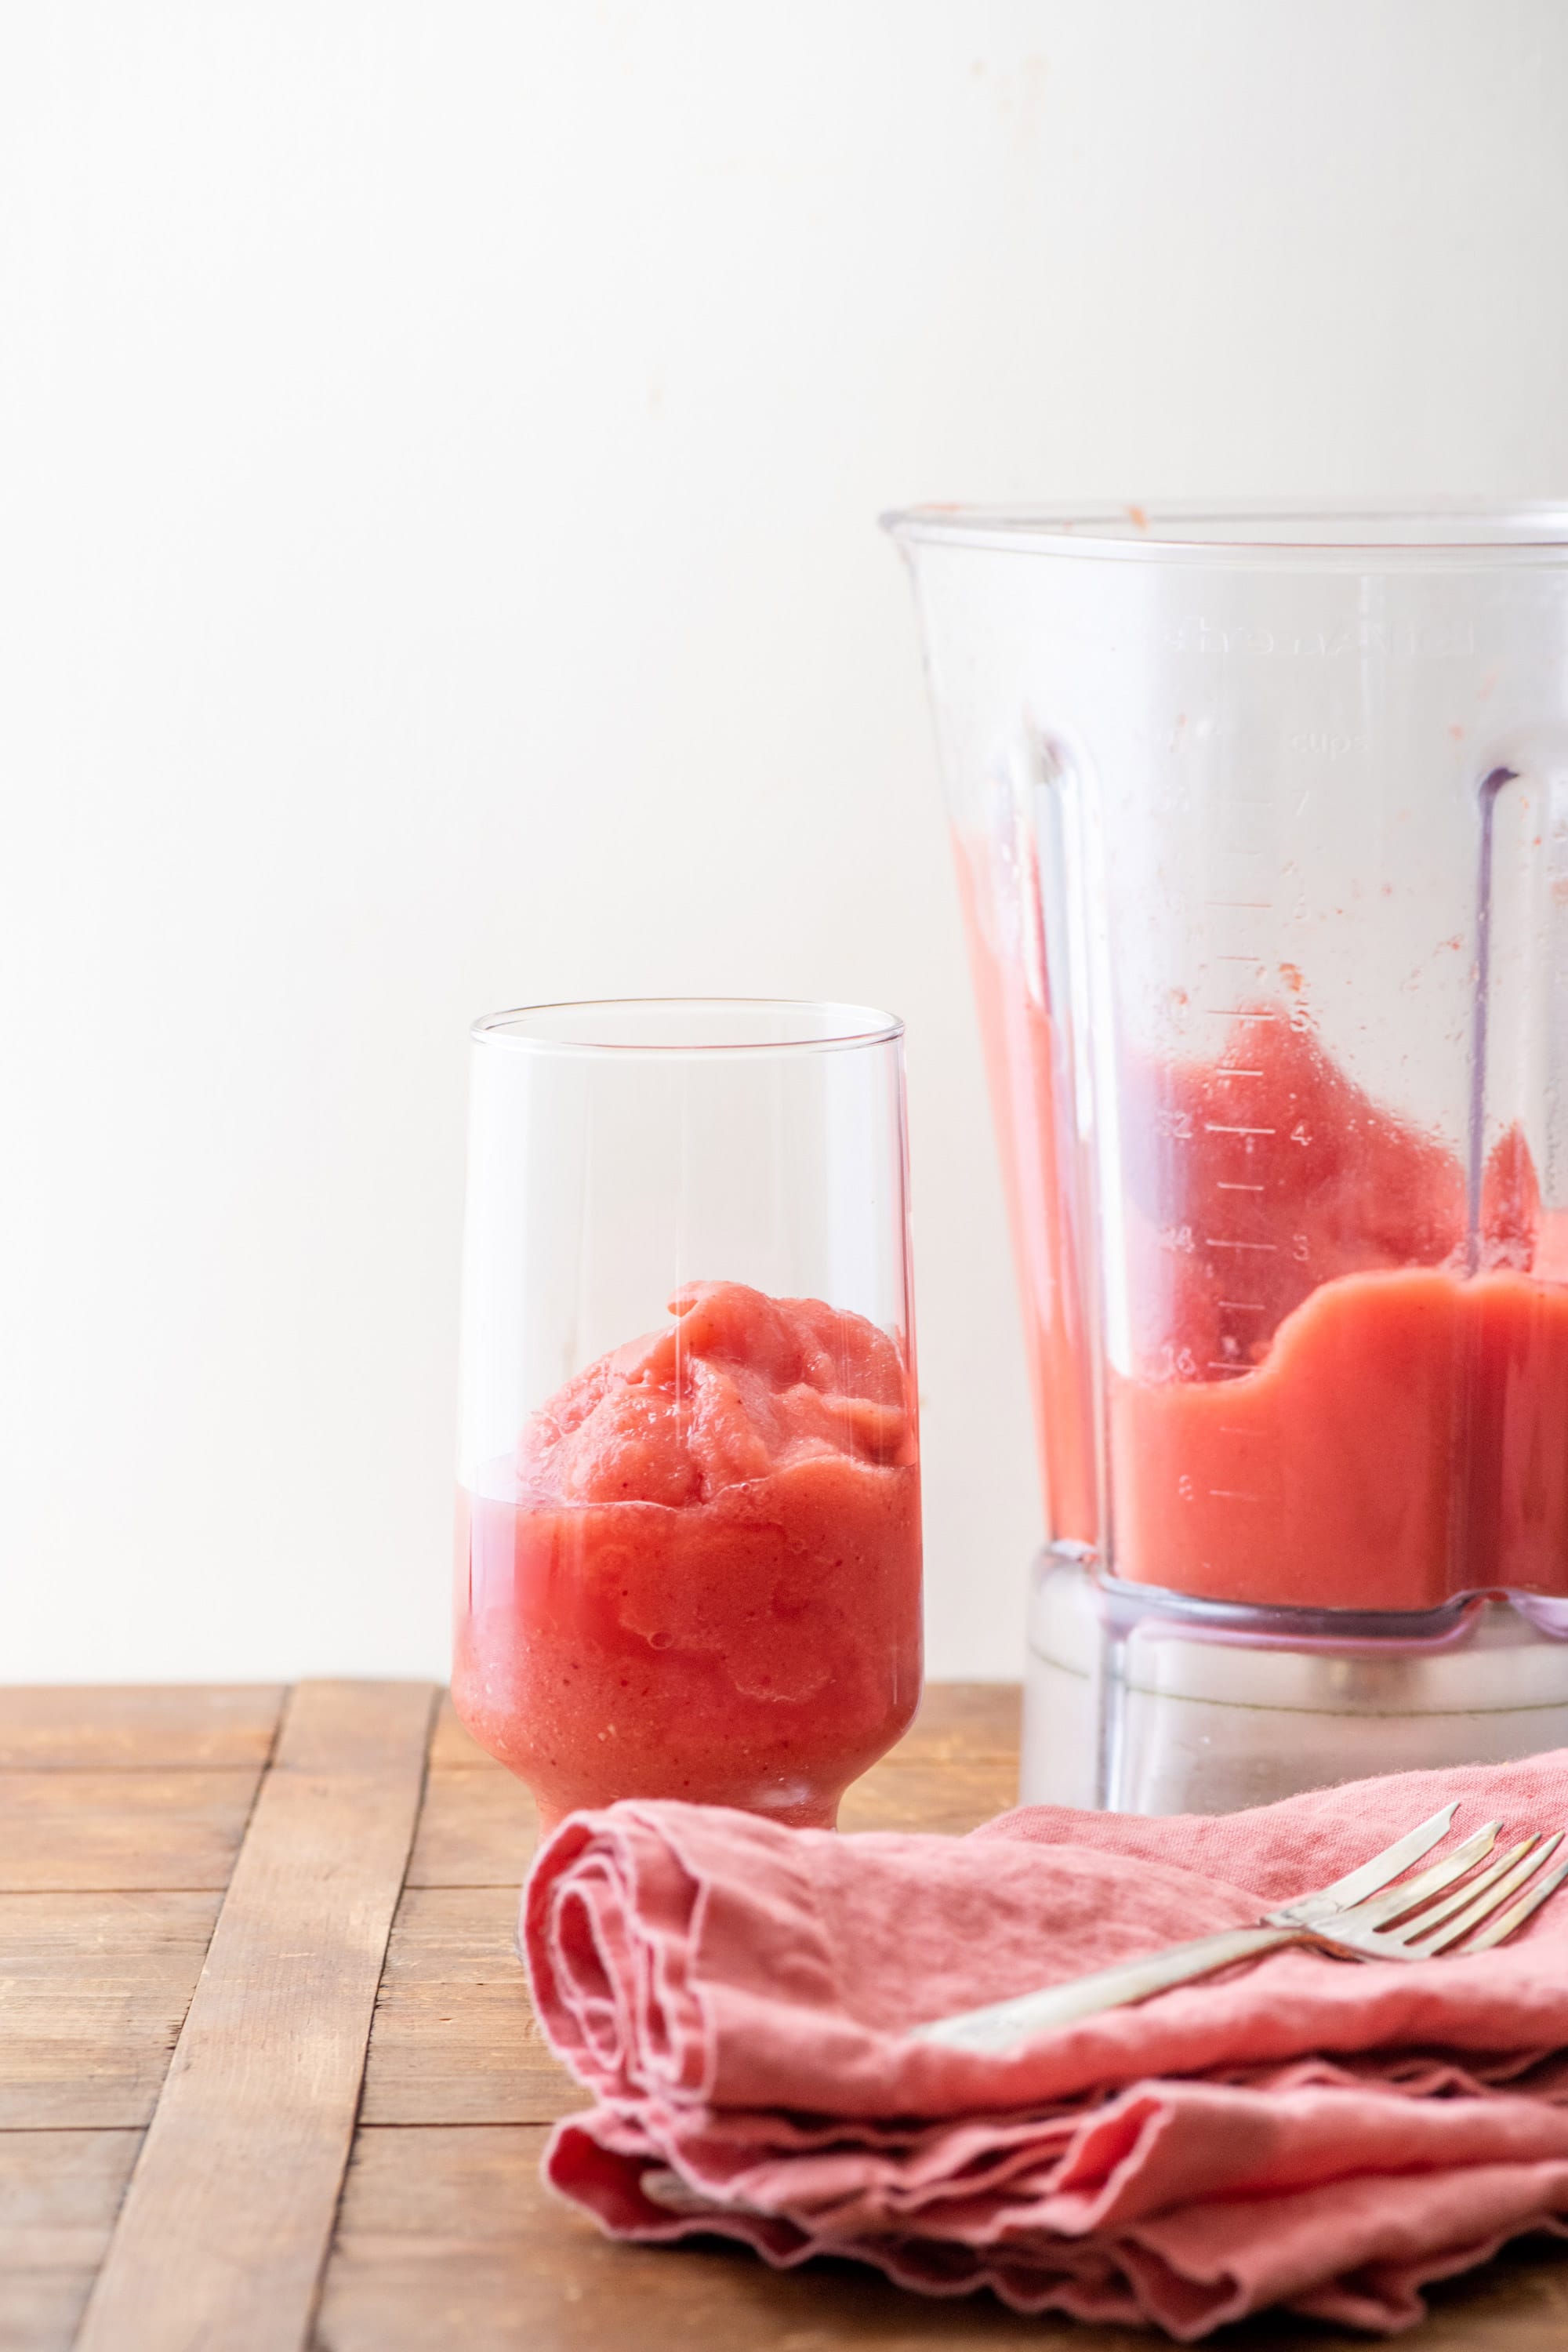 Glass and blender of Watermelon Strawberry Smoothie.